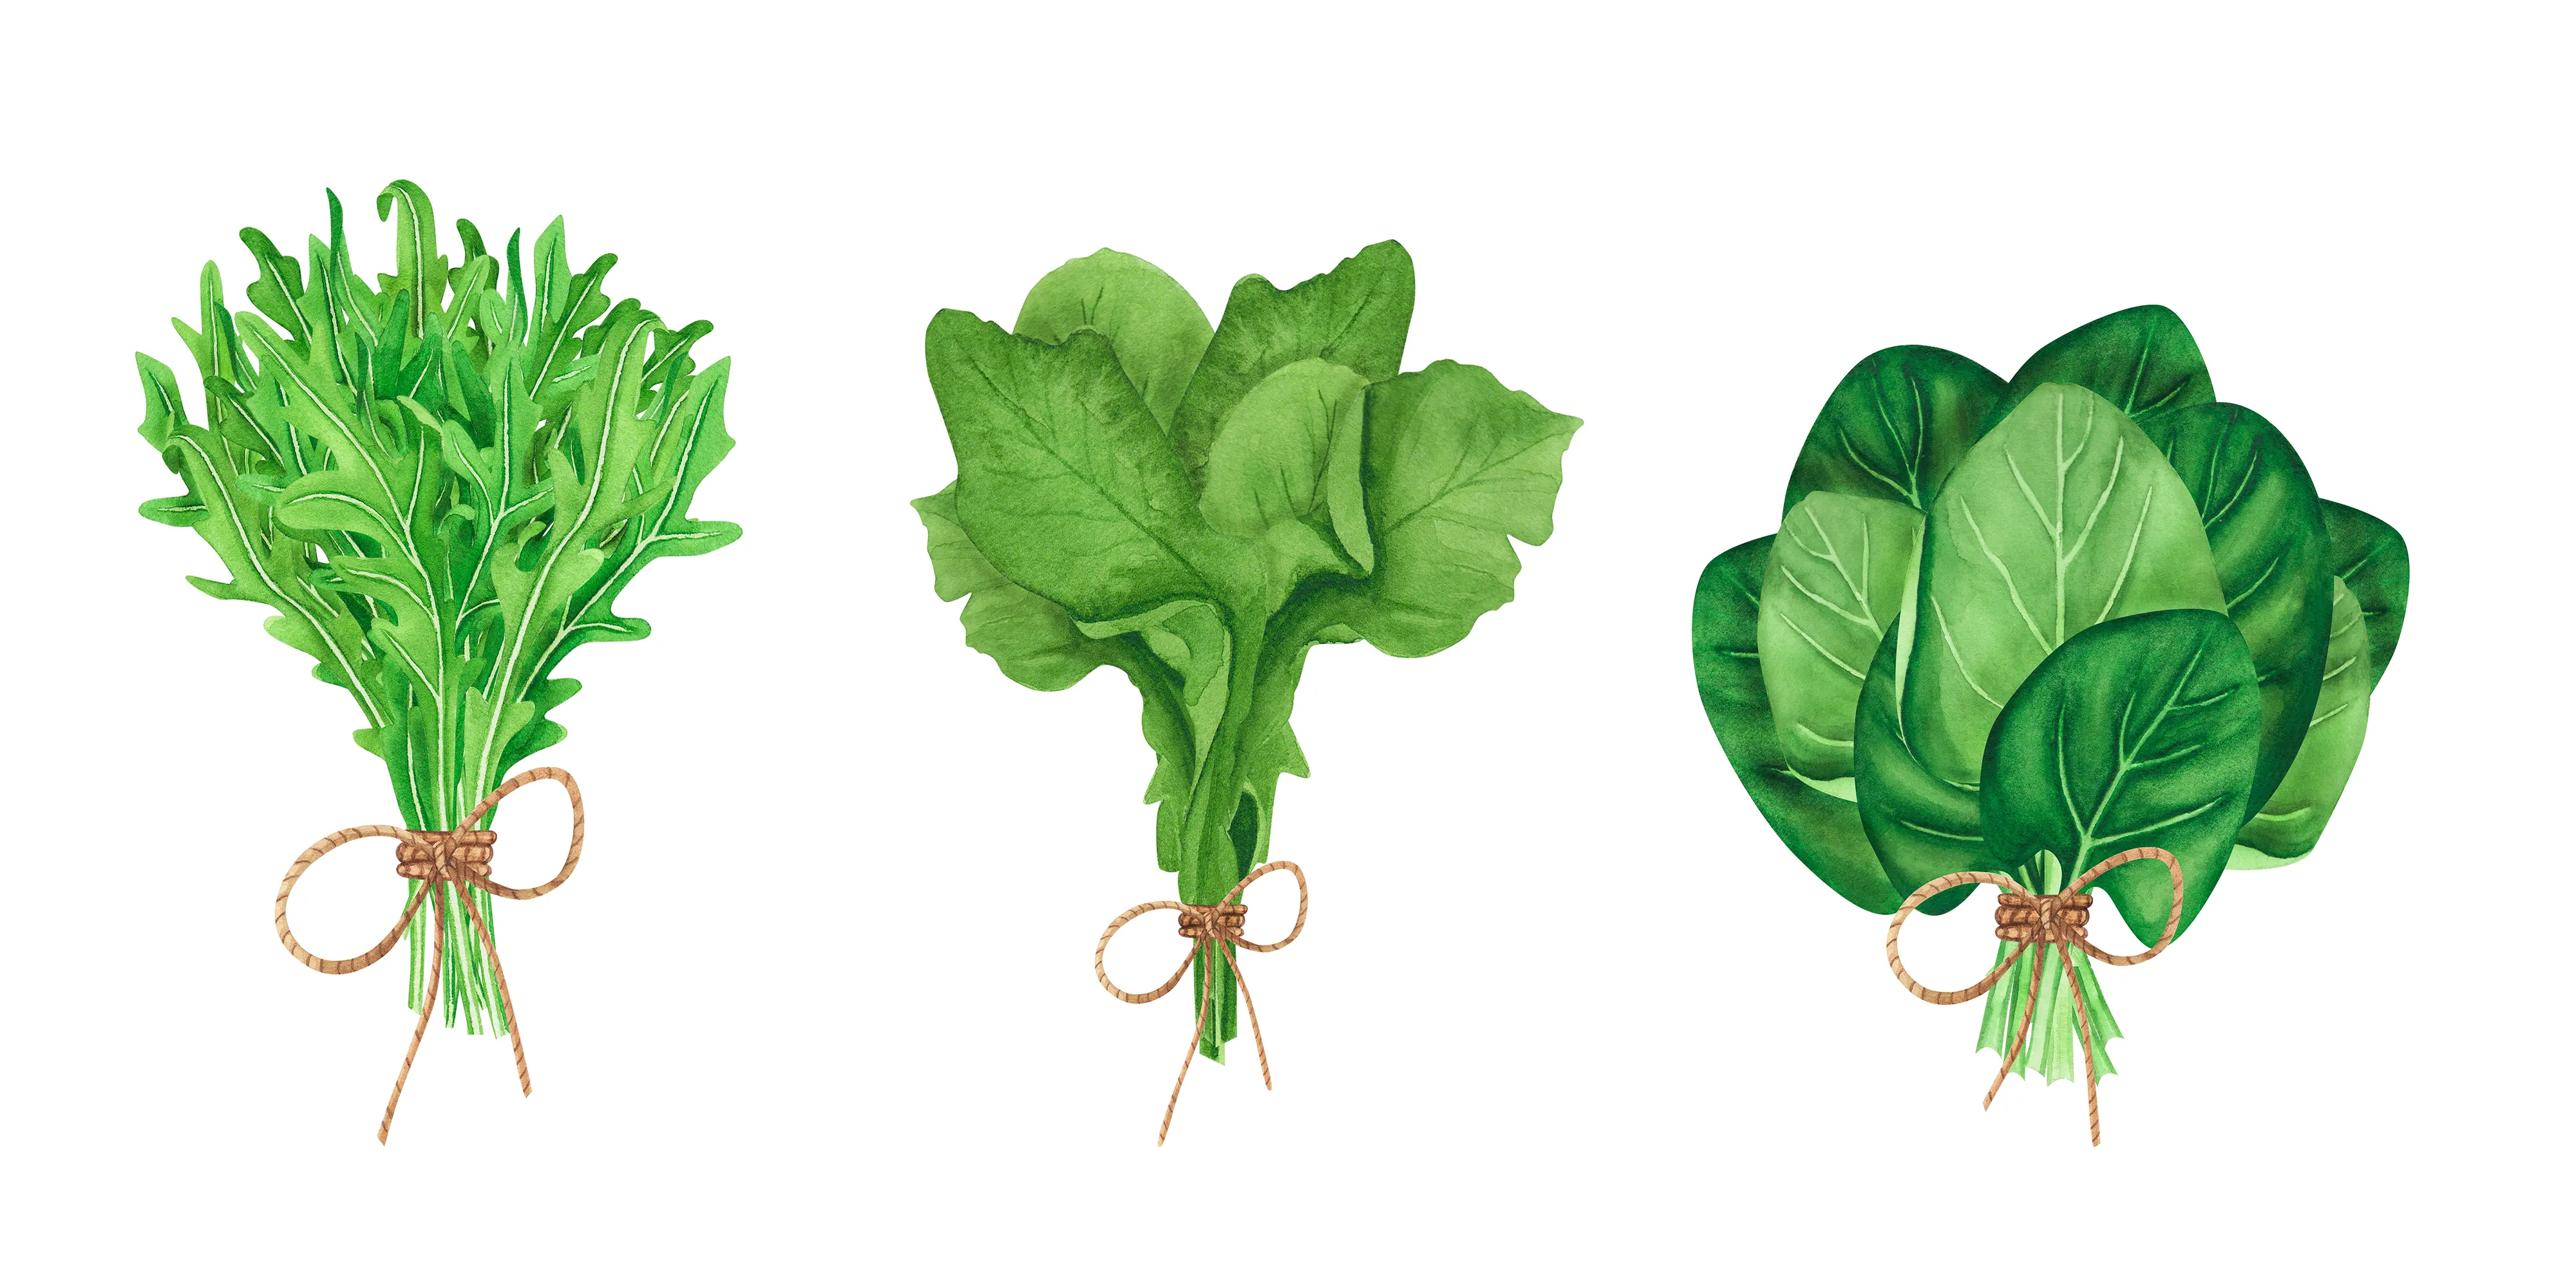 Leafy vegetables set agriculture and green plant Vector Image